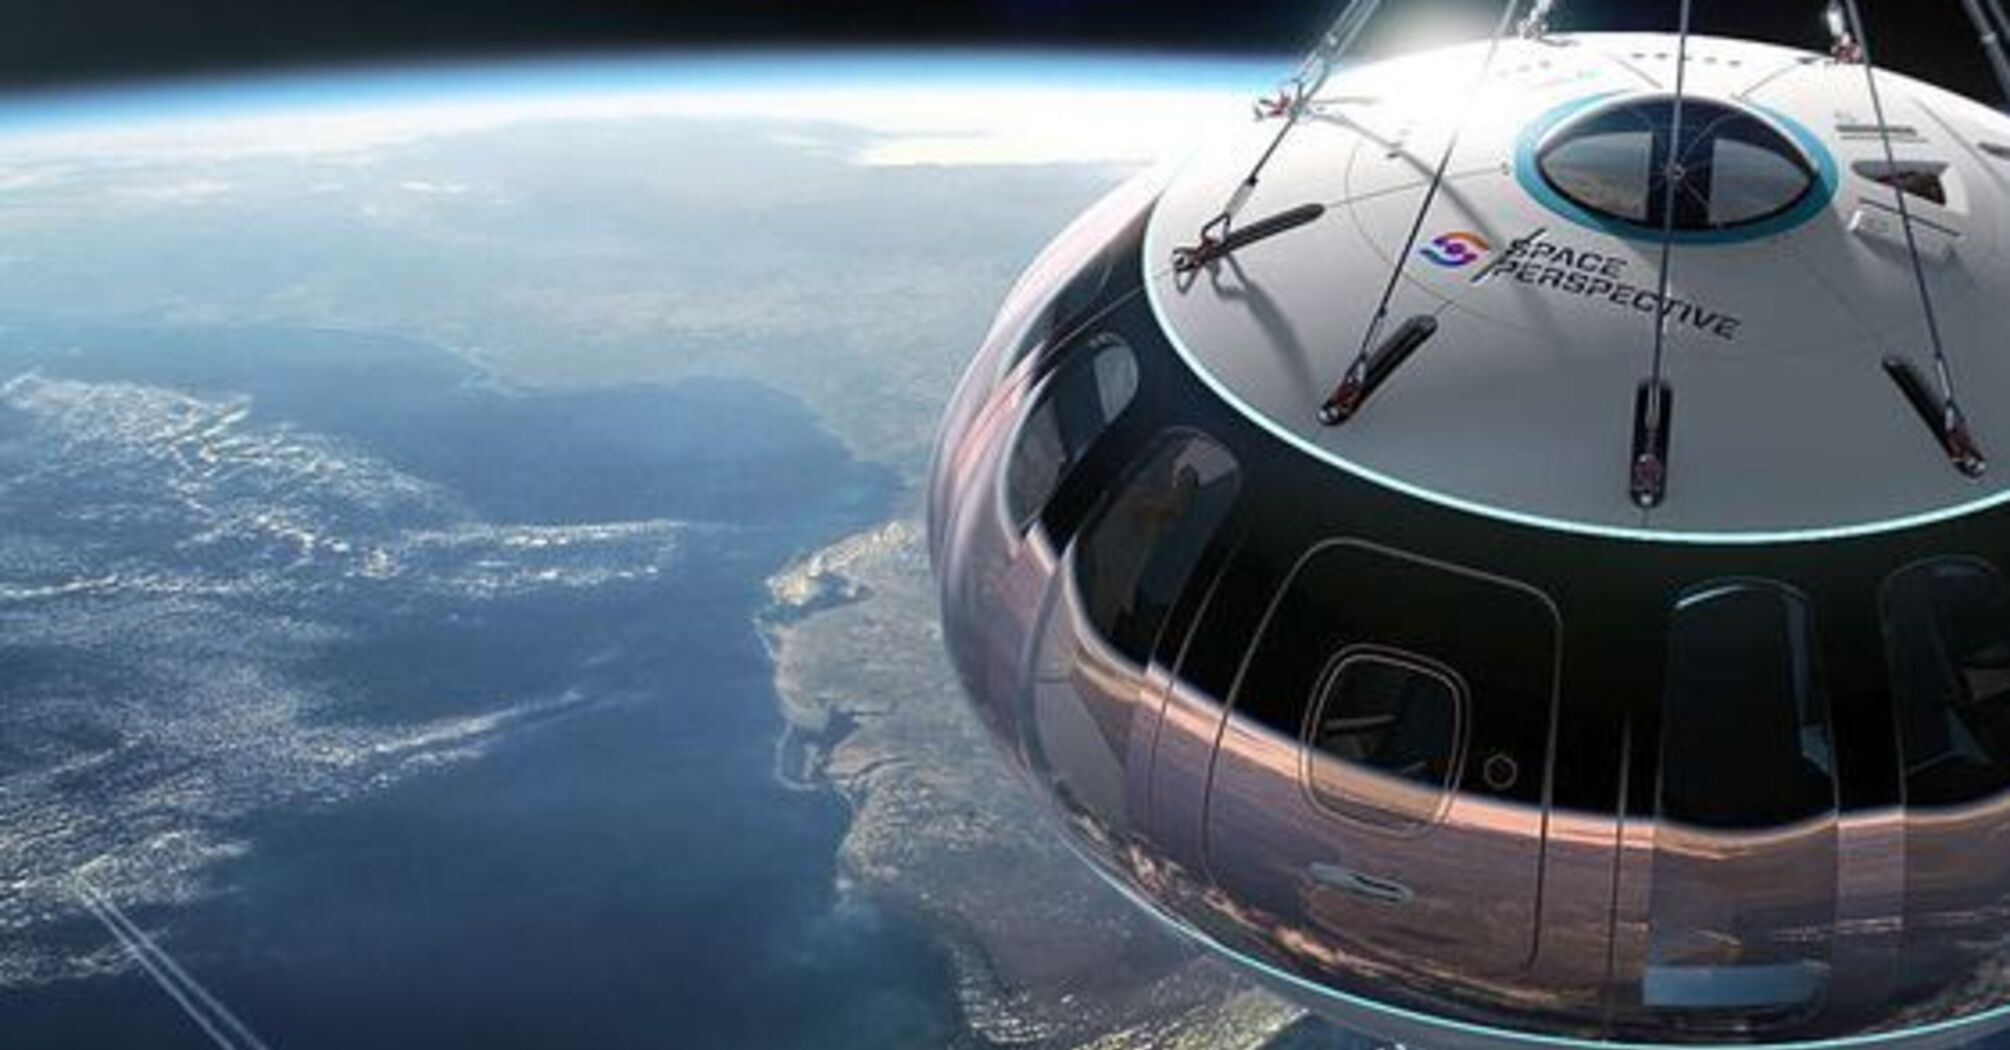 Space Perspective shows prototype of Neptune capsule for space tourism